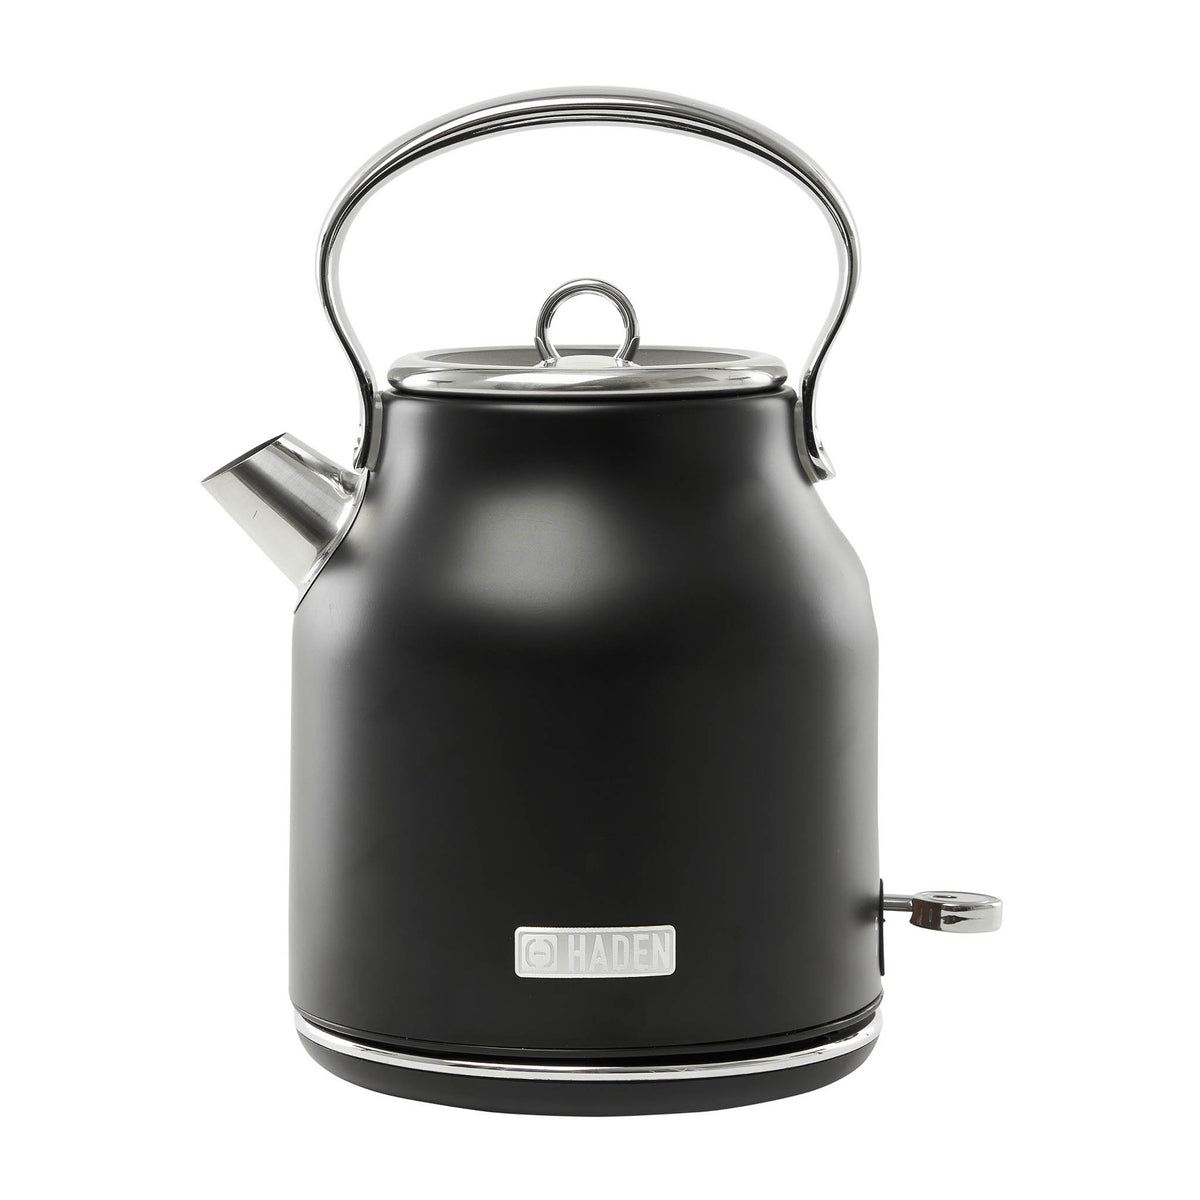 Haden Perth 1.7 Liter Stainless Steel Electric Kettle with Auto Shut-Off,  Gray